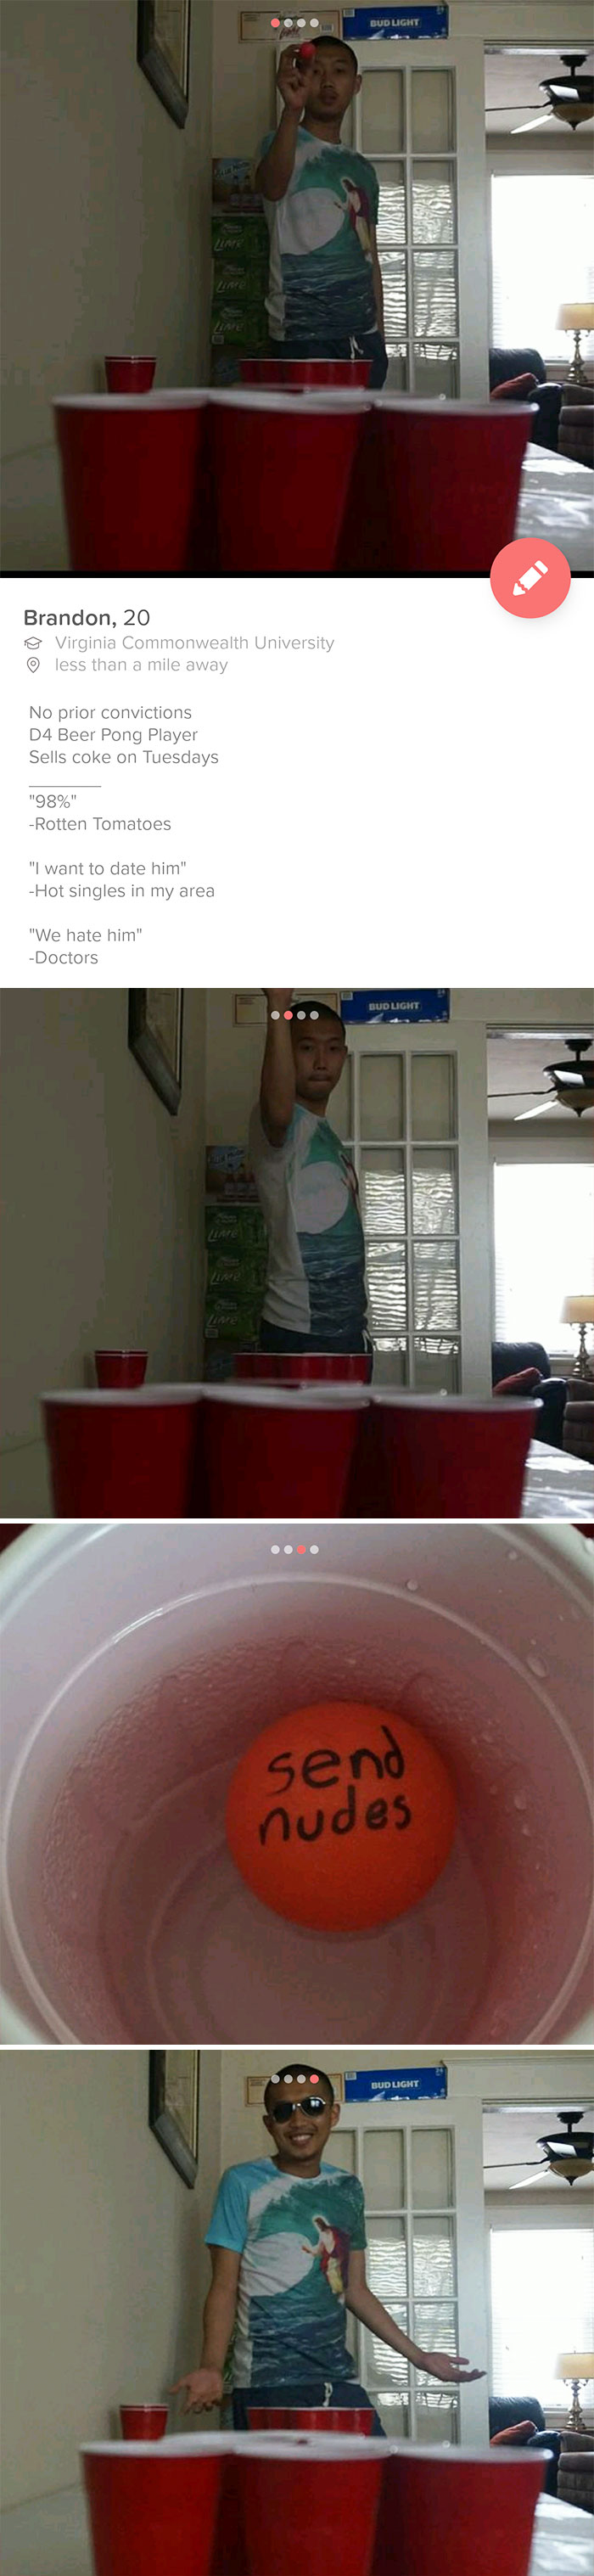 Tinder profile of a man playing beer pong asking for nudes 